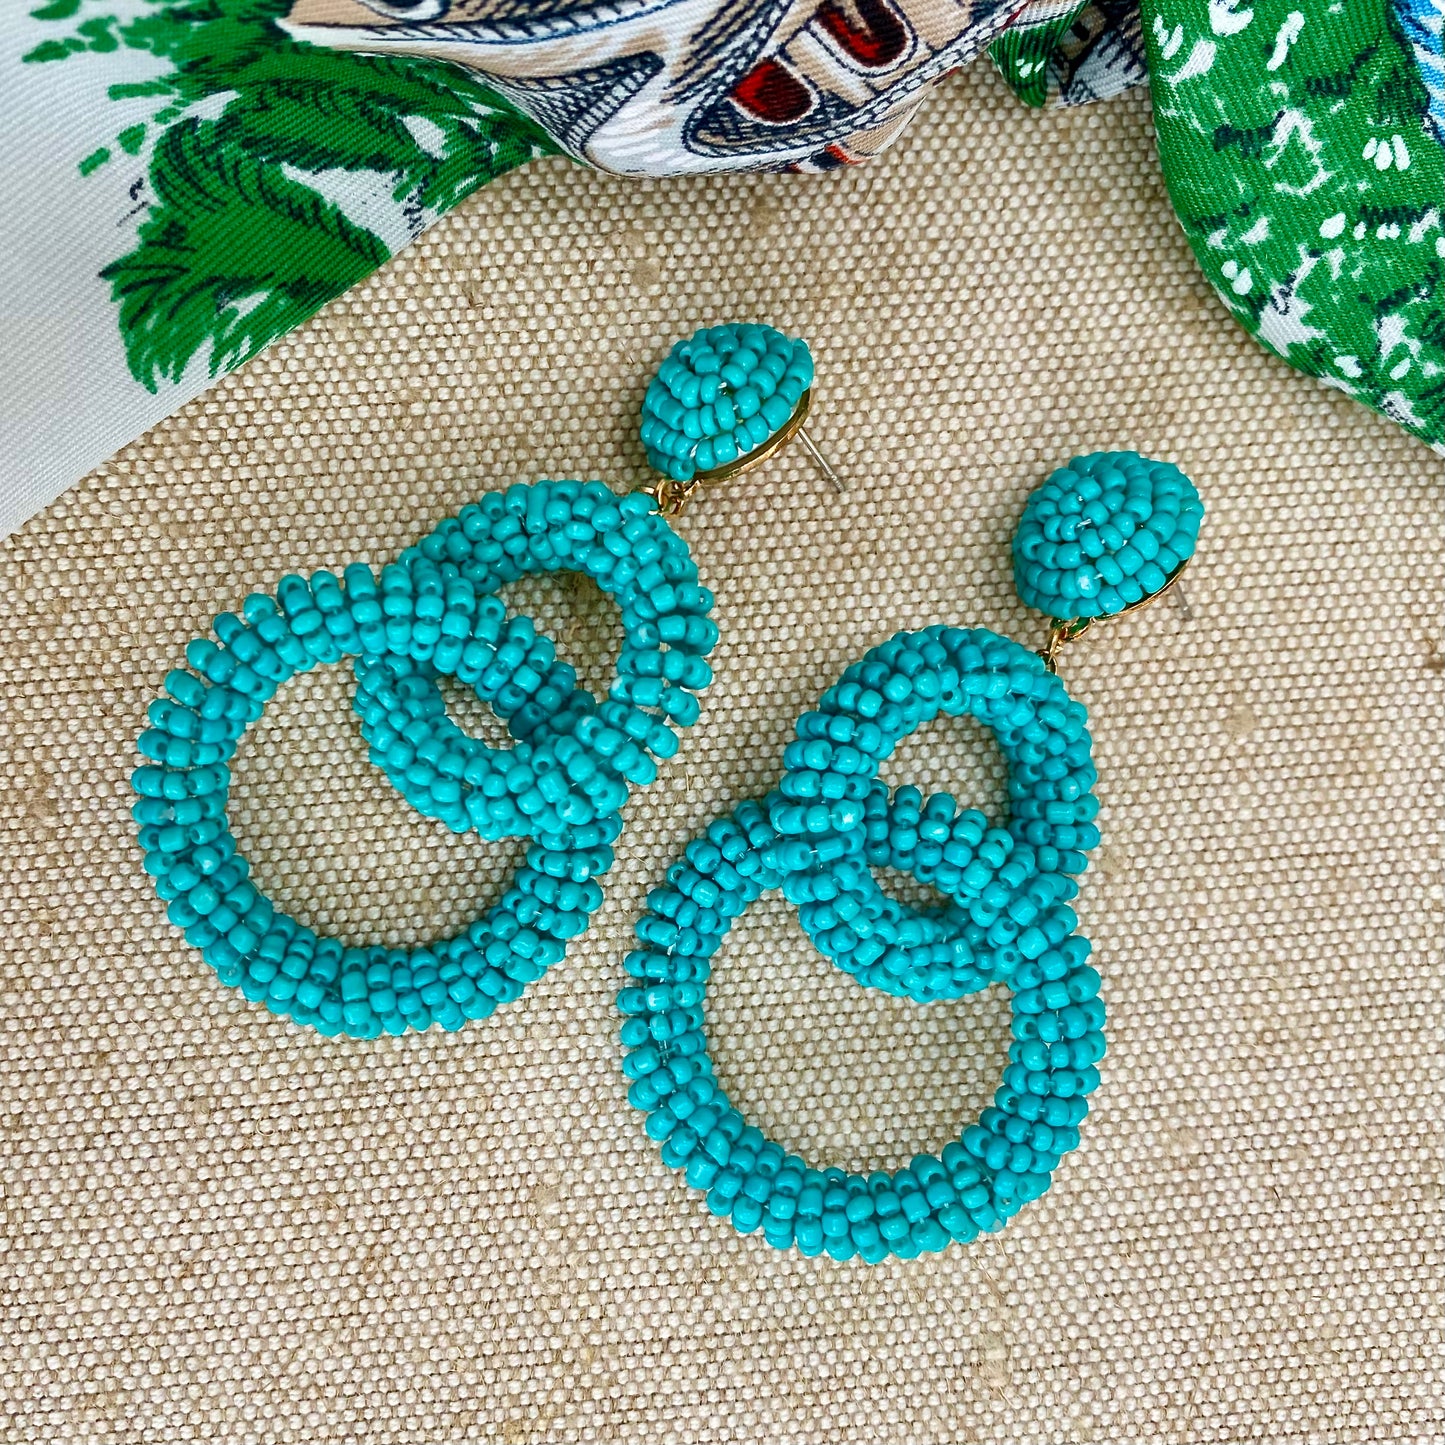      Turquoise beaded statement earrings     Intertwined hoop design     Post and stud back fastening     Drop 8cm     FREE UK SHIPPING